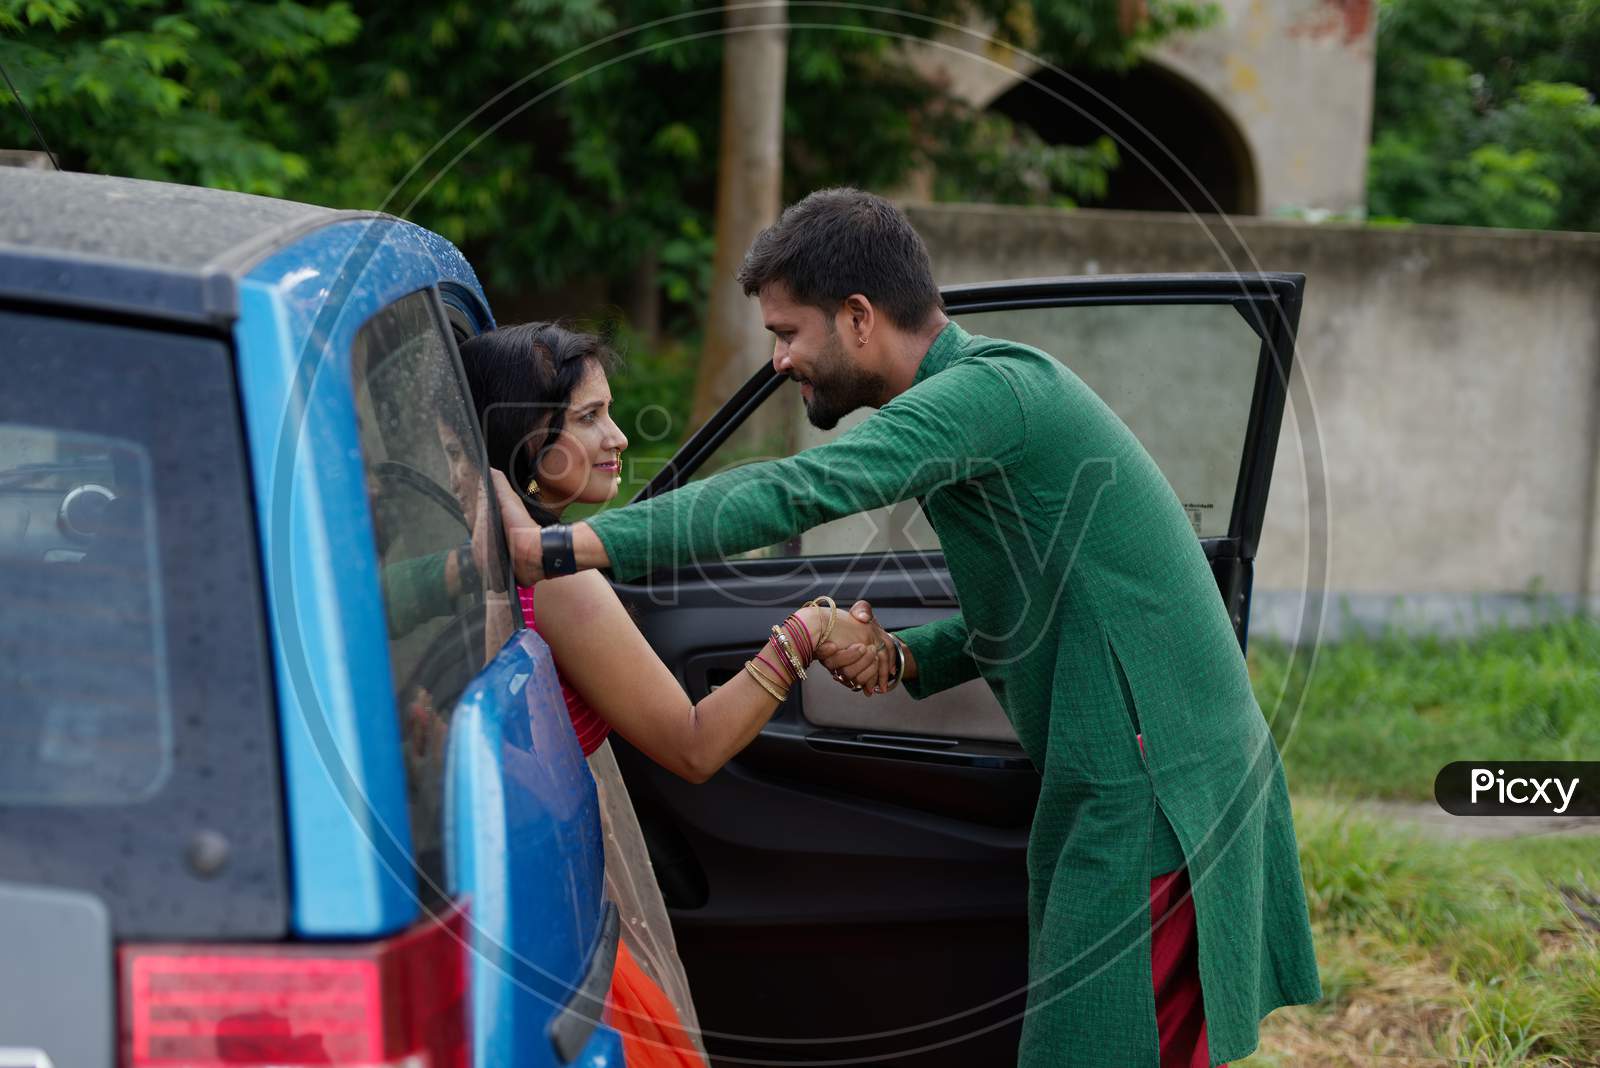 Young and attractive Indian Bengali brunette woman trying to get out of a blue car wearing Indian traditional ethnic cloths while her man is by opening door. Indian lifestyle and fashion